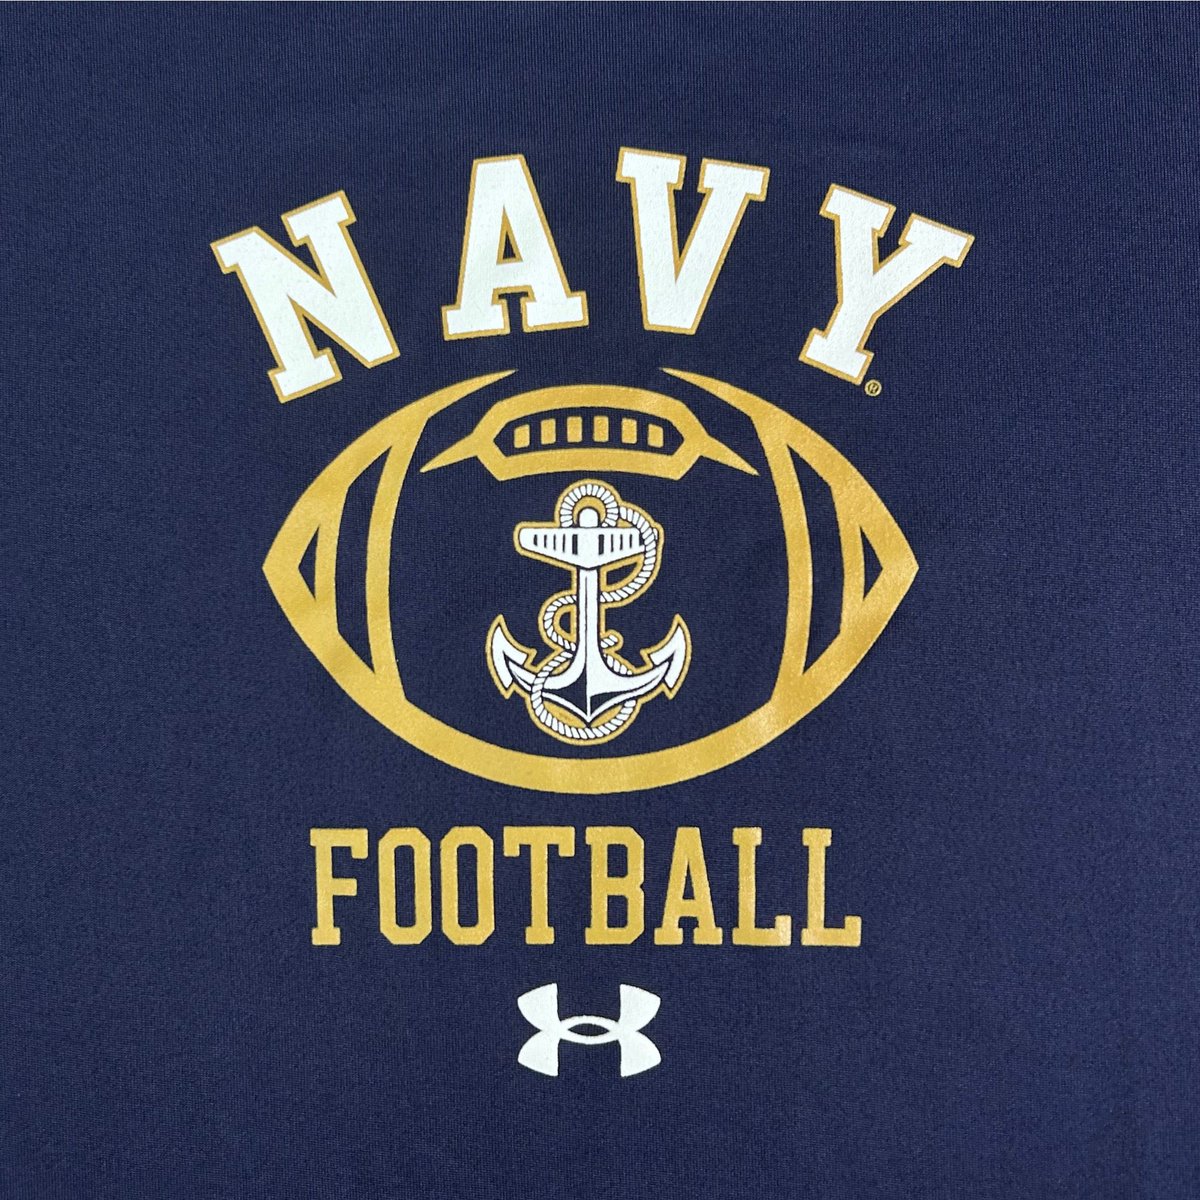 After a great conversation with @CoachLaurendine I am blessed to receive a offer to play and the American Naval Academy #navyfootball @FootballTomball @NavyFB @CoachBrandonMik @handal_dave